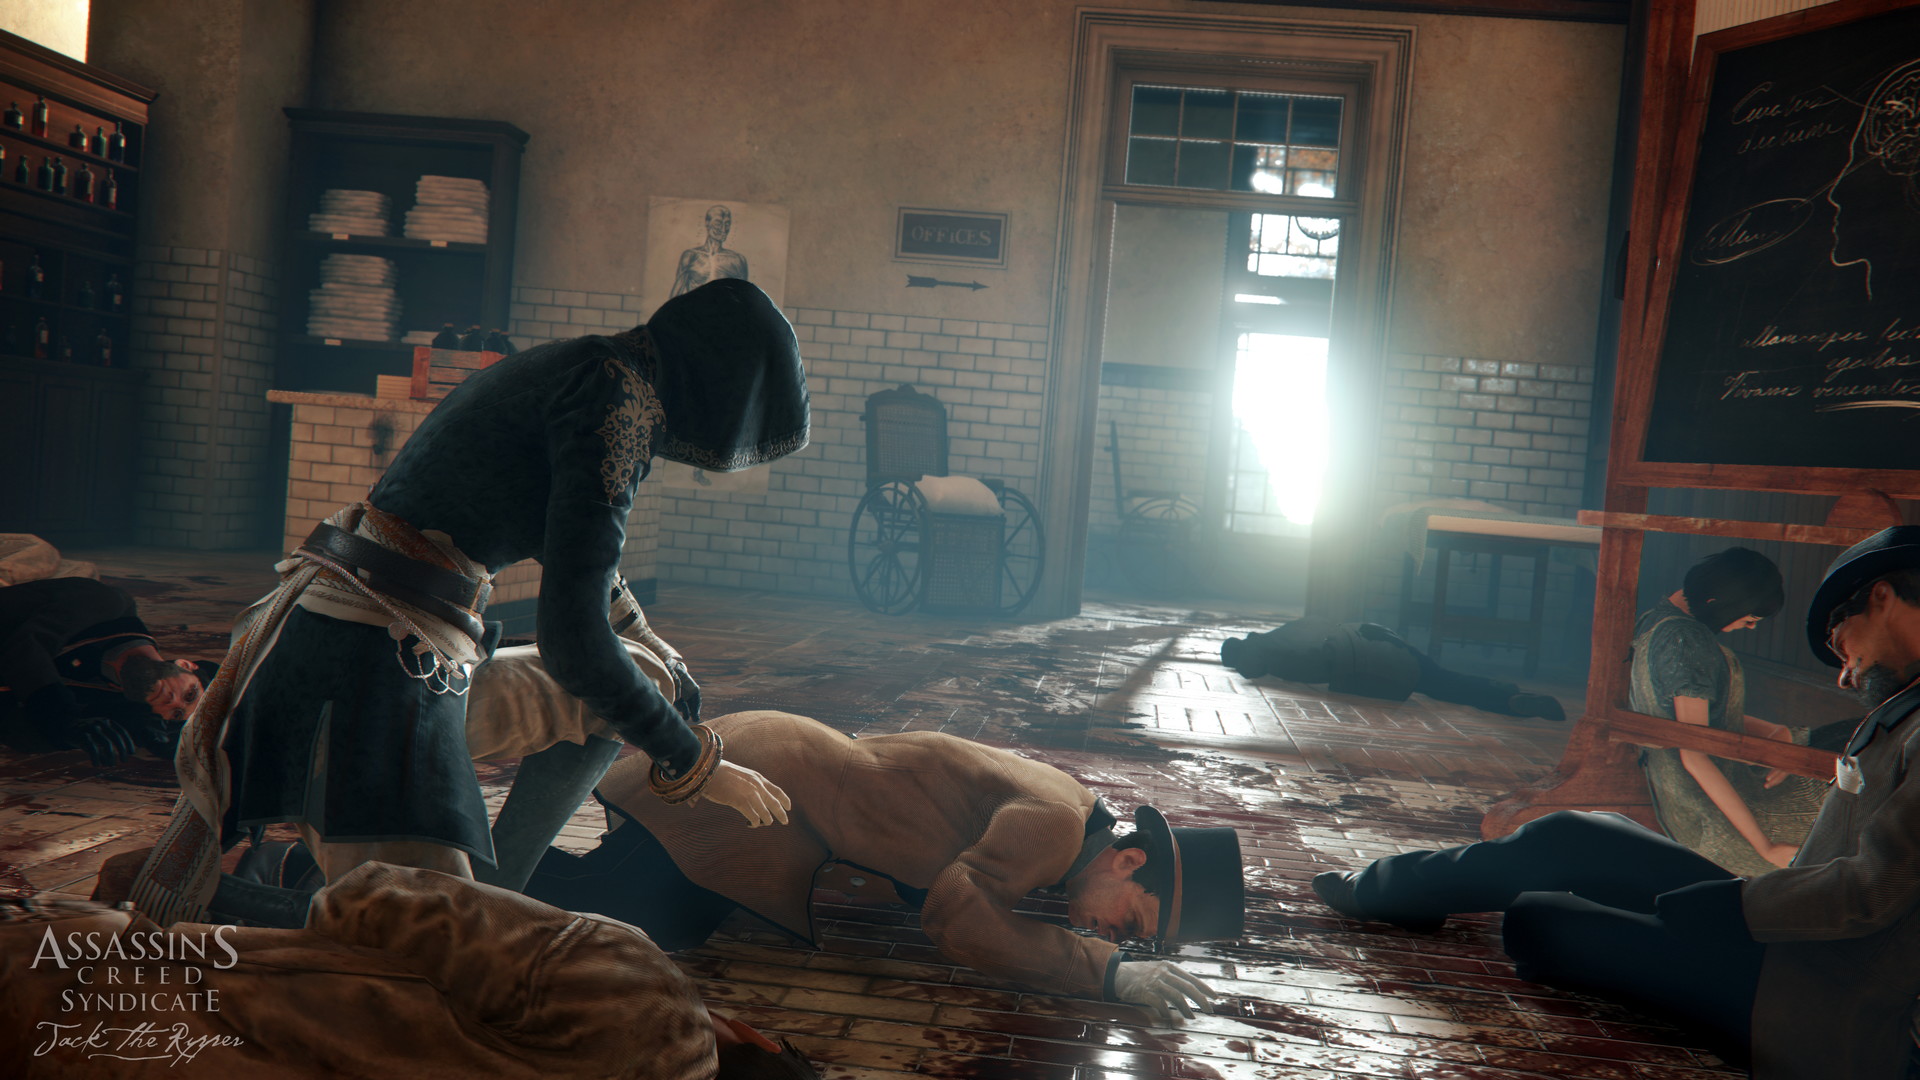 Assassin's Creed: Syndicate - Jack the Ripper - screenshot 4